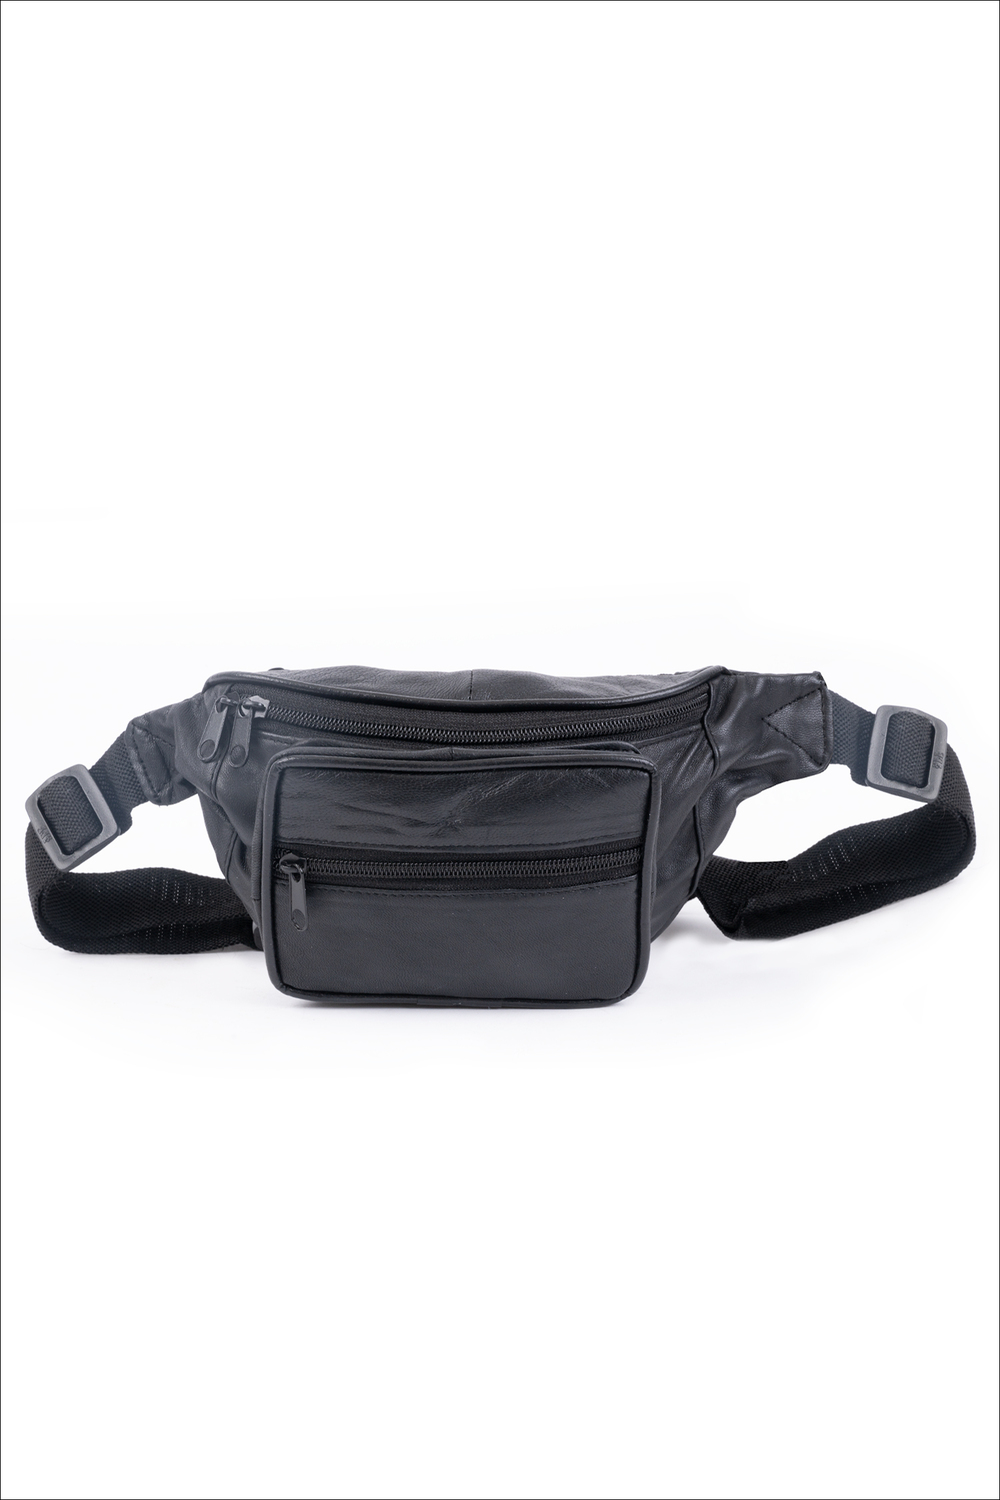 Leather belt bag with 3 zippered compartments